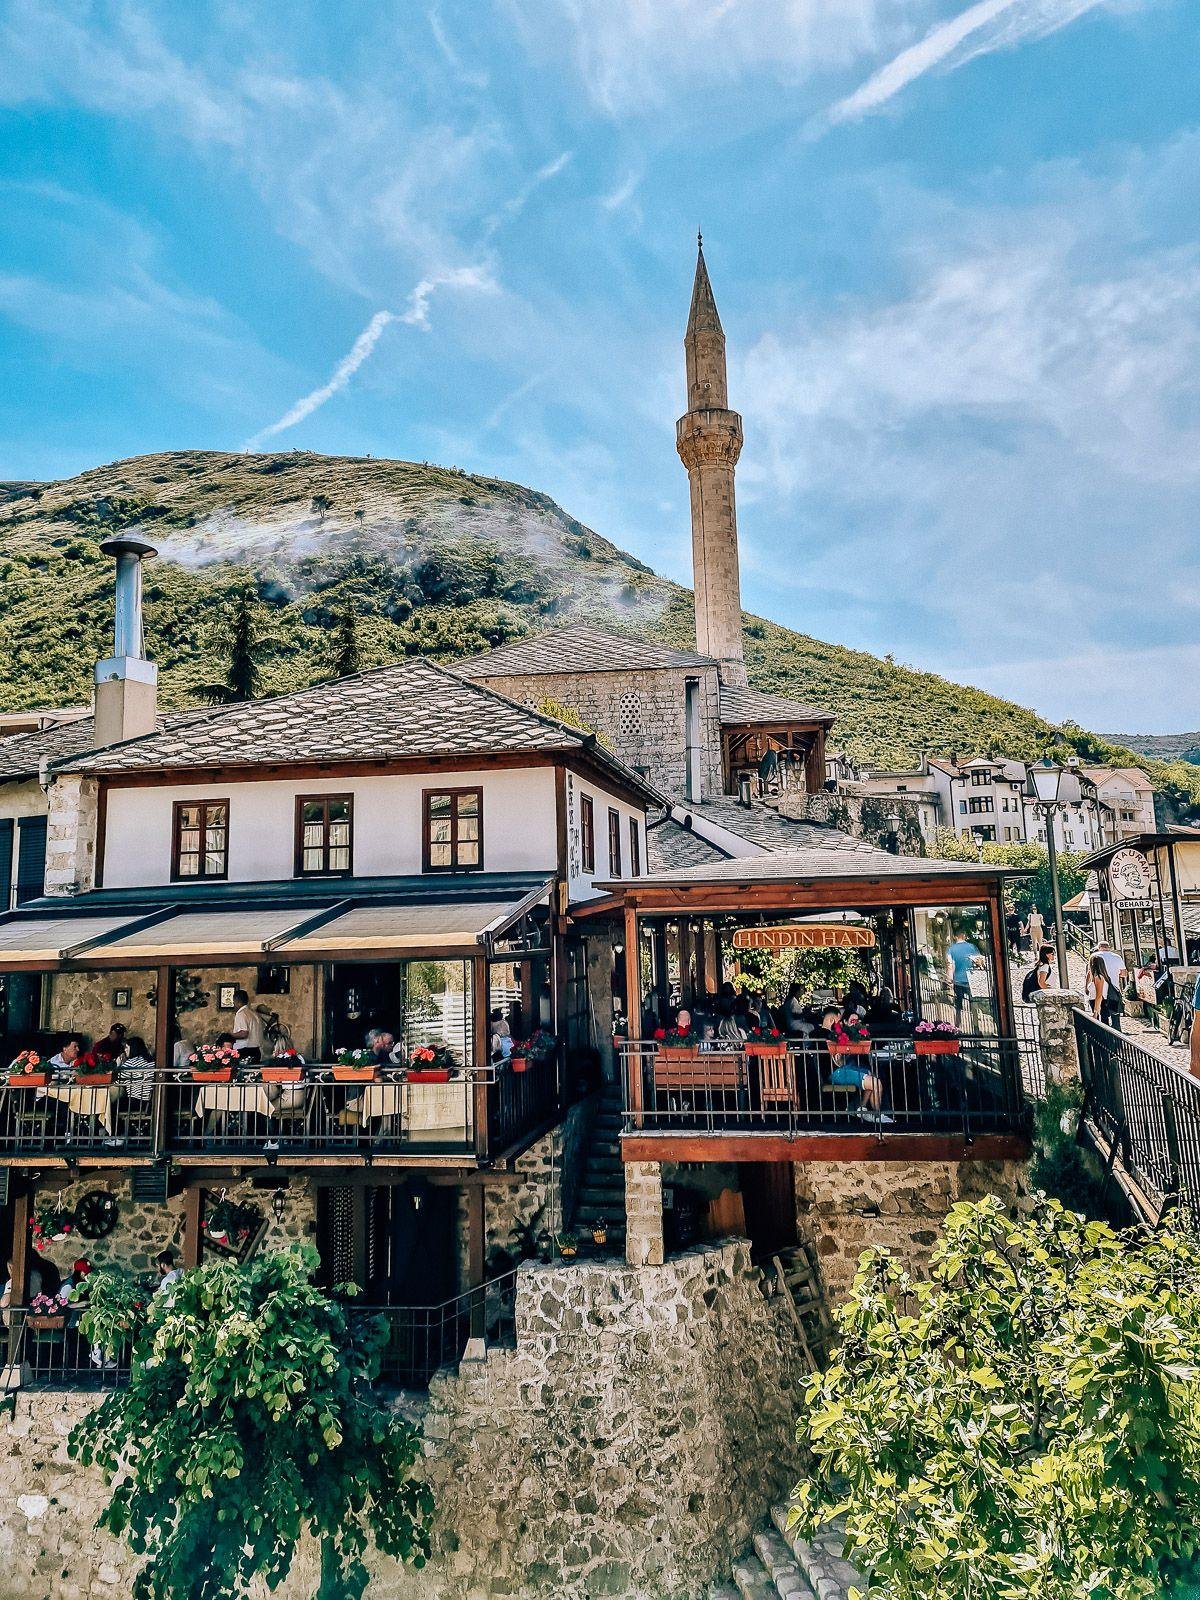 traditional Ottoman buildings and a minaret in old town Mostar, Bosnia